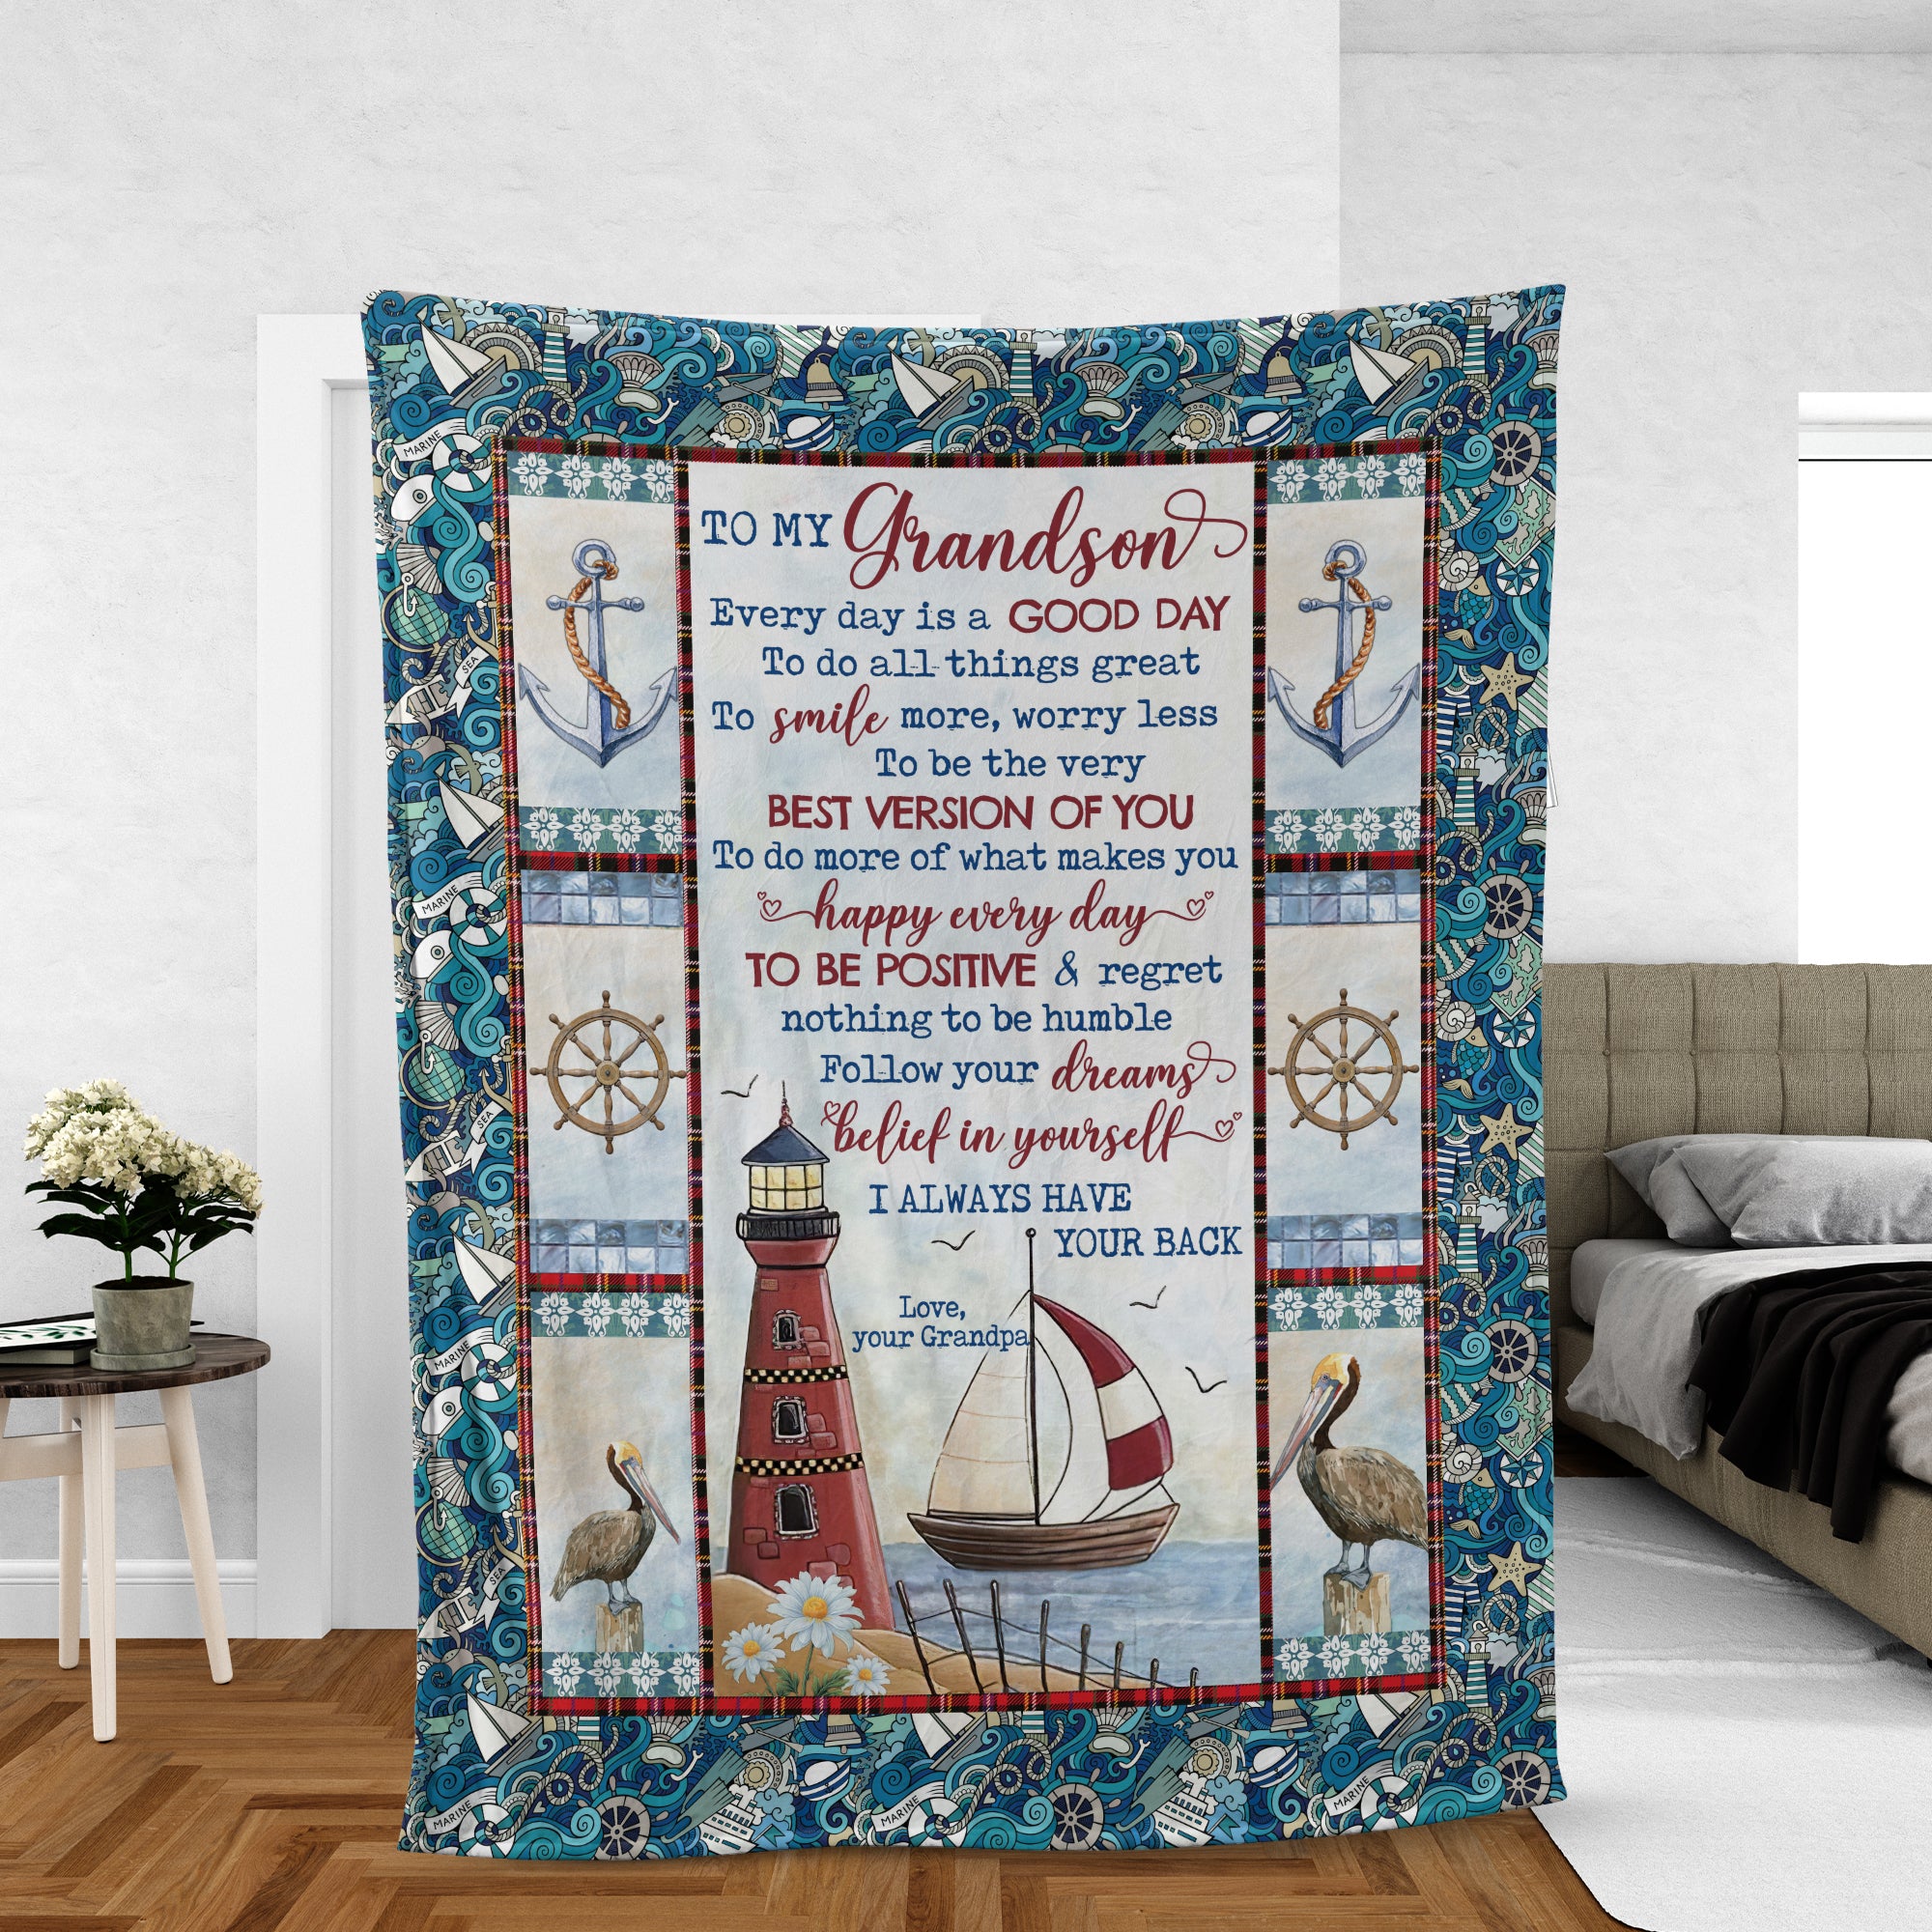 Grandson Blanket, Family Blanket, Perfect Gift For Grandson From Grandma, Grandpa - Red Lighthouse, Boat And Blue Ocean, I Always Have Your Back